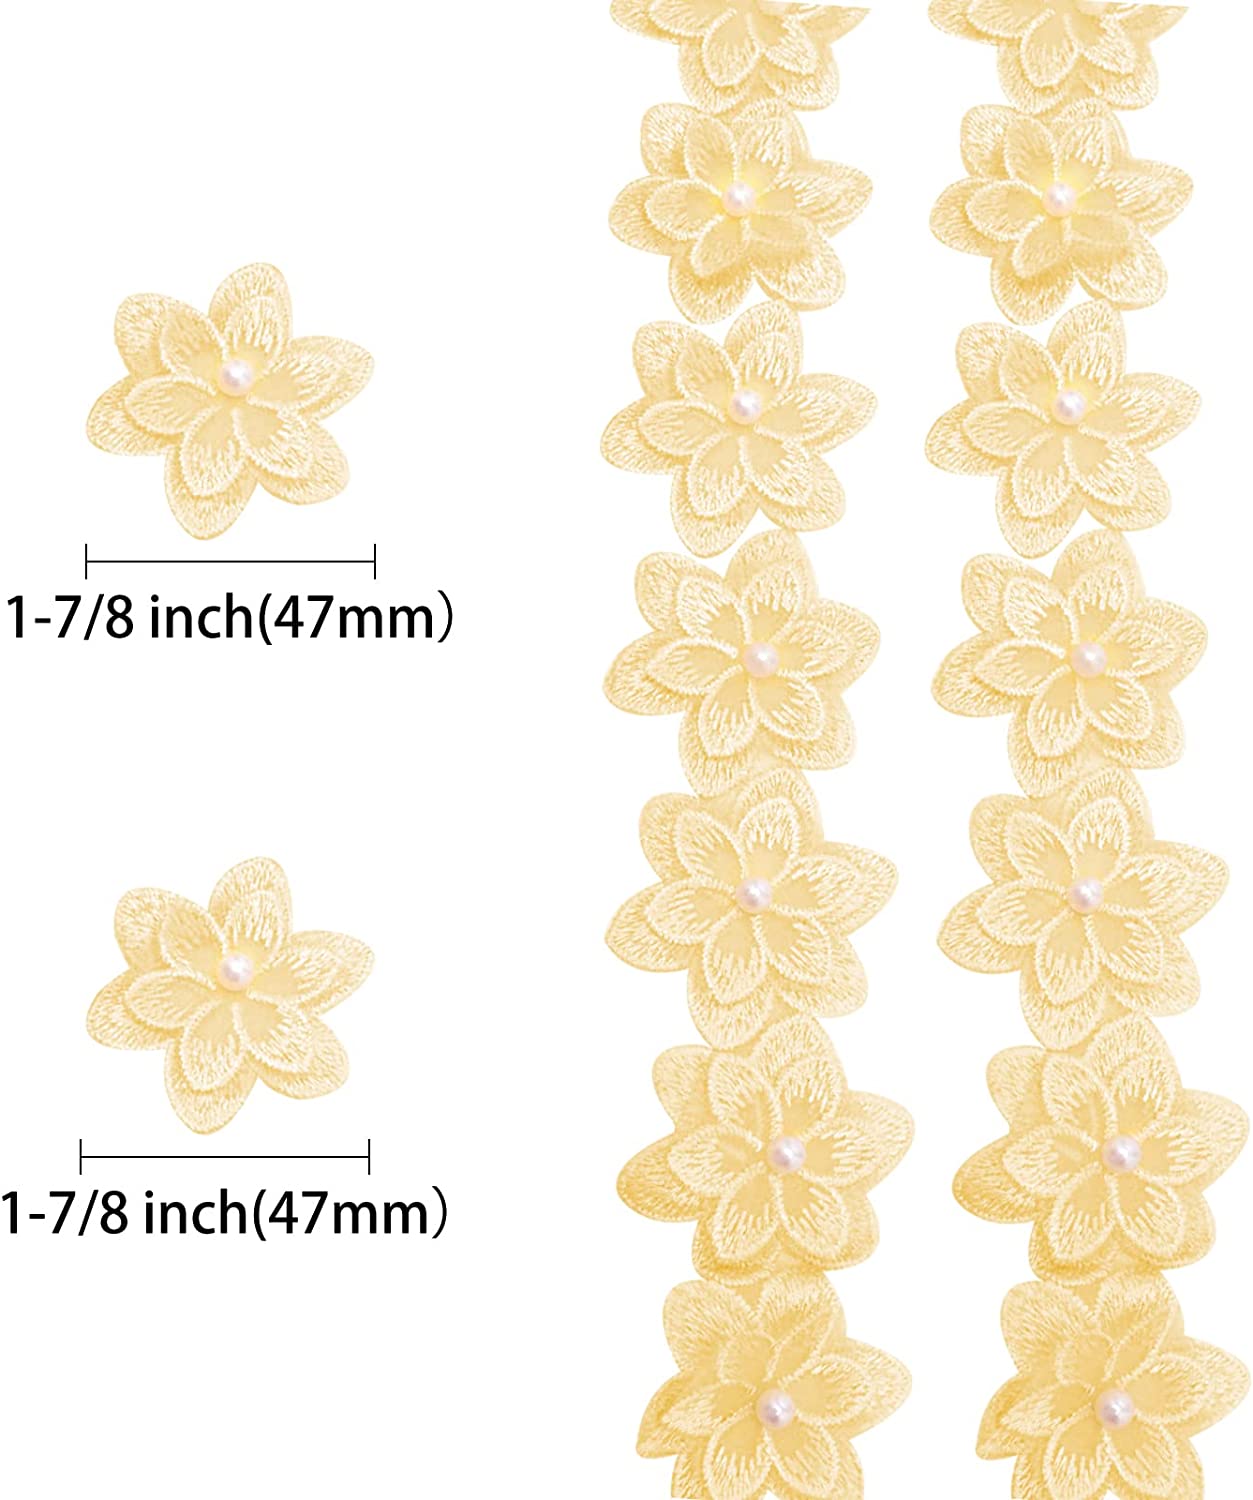 5 Yards Organza Flower Lace Ribbon Floral Vintage Pearl Edging Trimmings Embroidered Edge Trim Fabric Applique for Sewing Costumes Gowns Home Decor DIY Crafts Supplies,Yellow